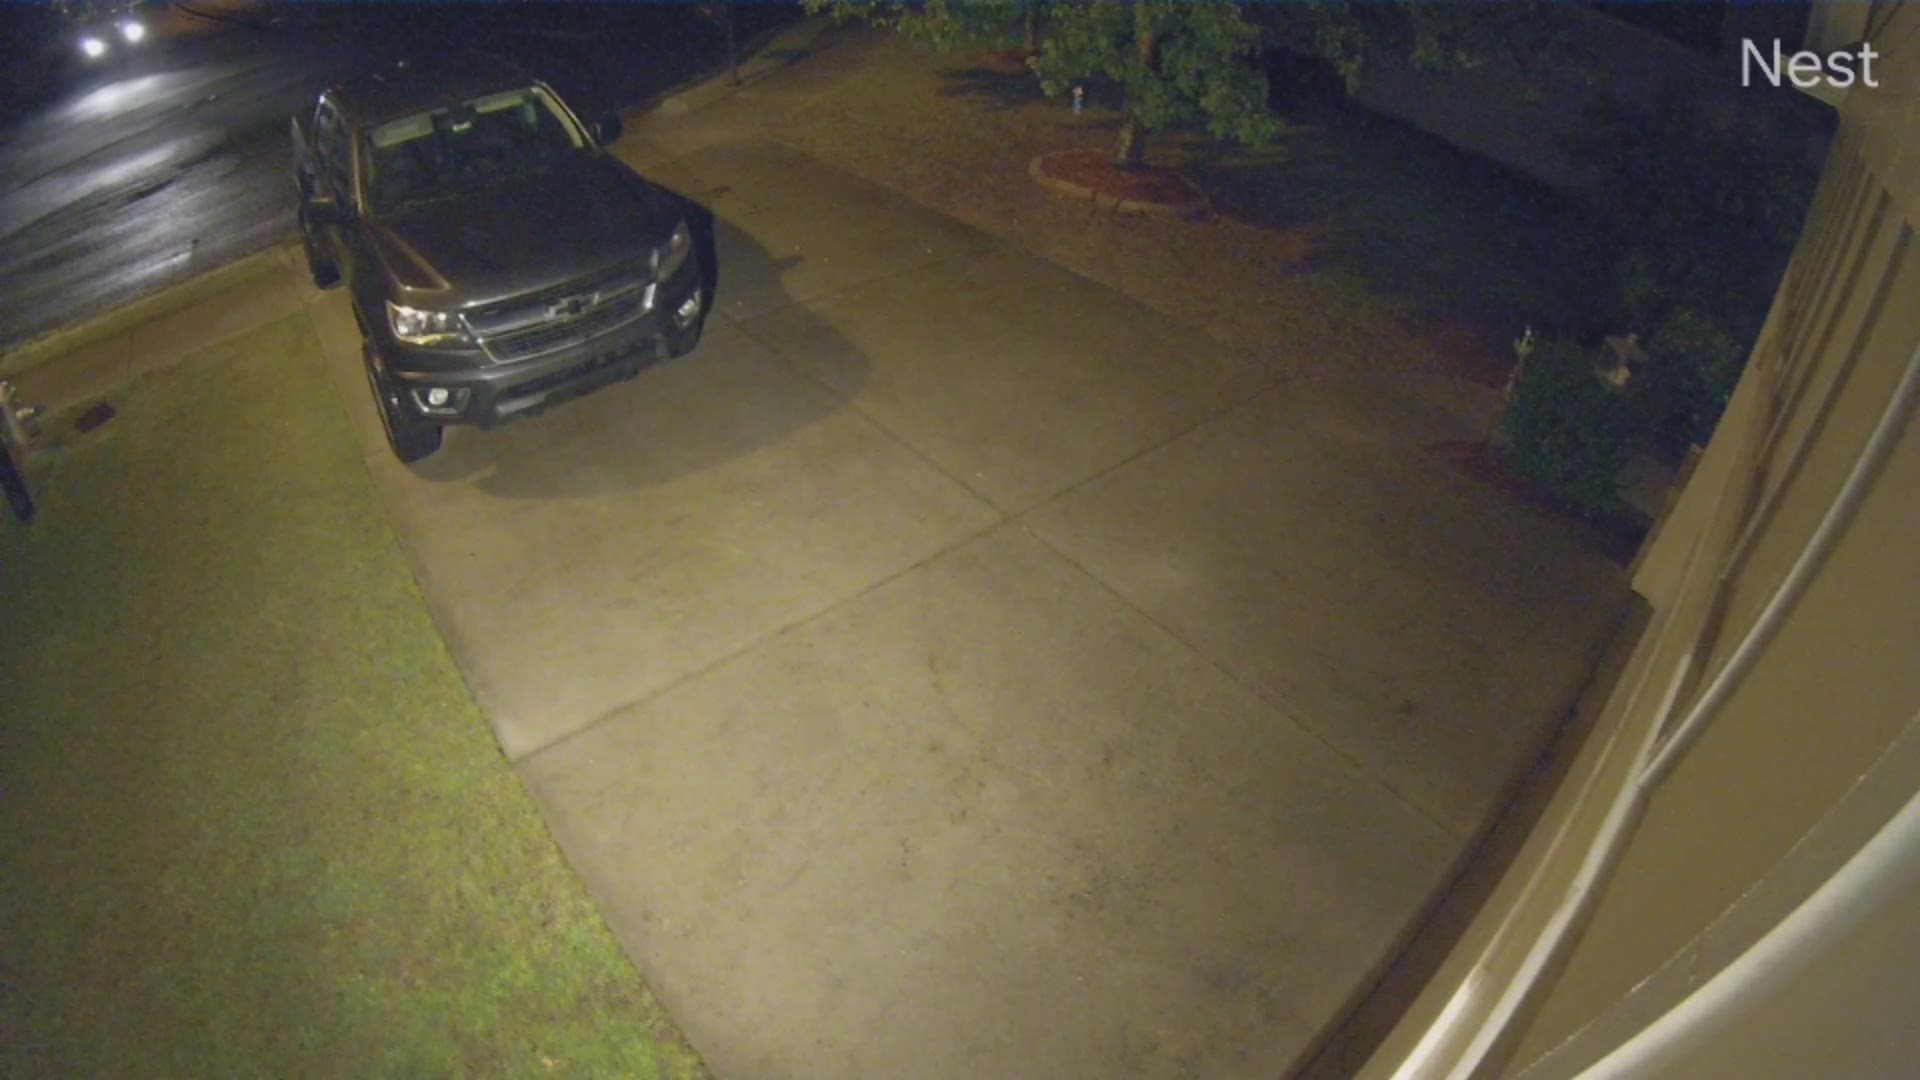 Police in Gwinnett County said they have surveillance video of several suspects checking vehicles in the Prospect Estates subdivision on July 6. When they found an open one, they would rummage through it and take anything they found of value.